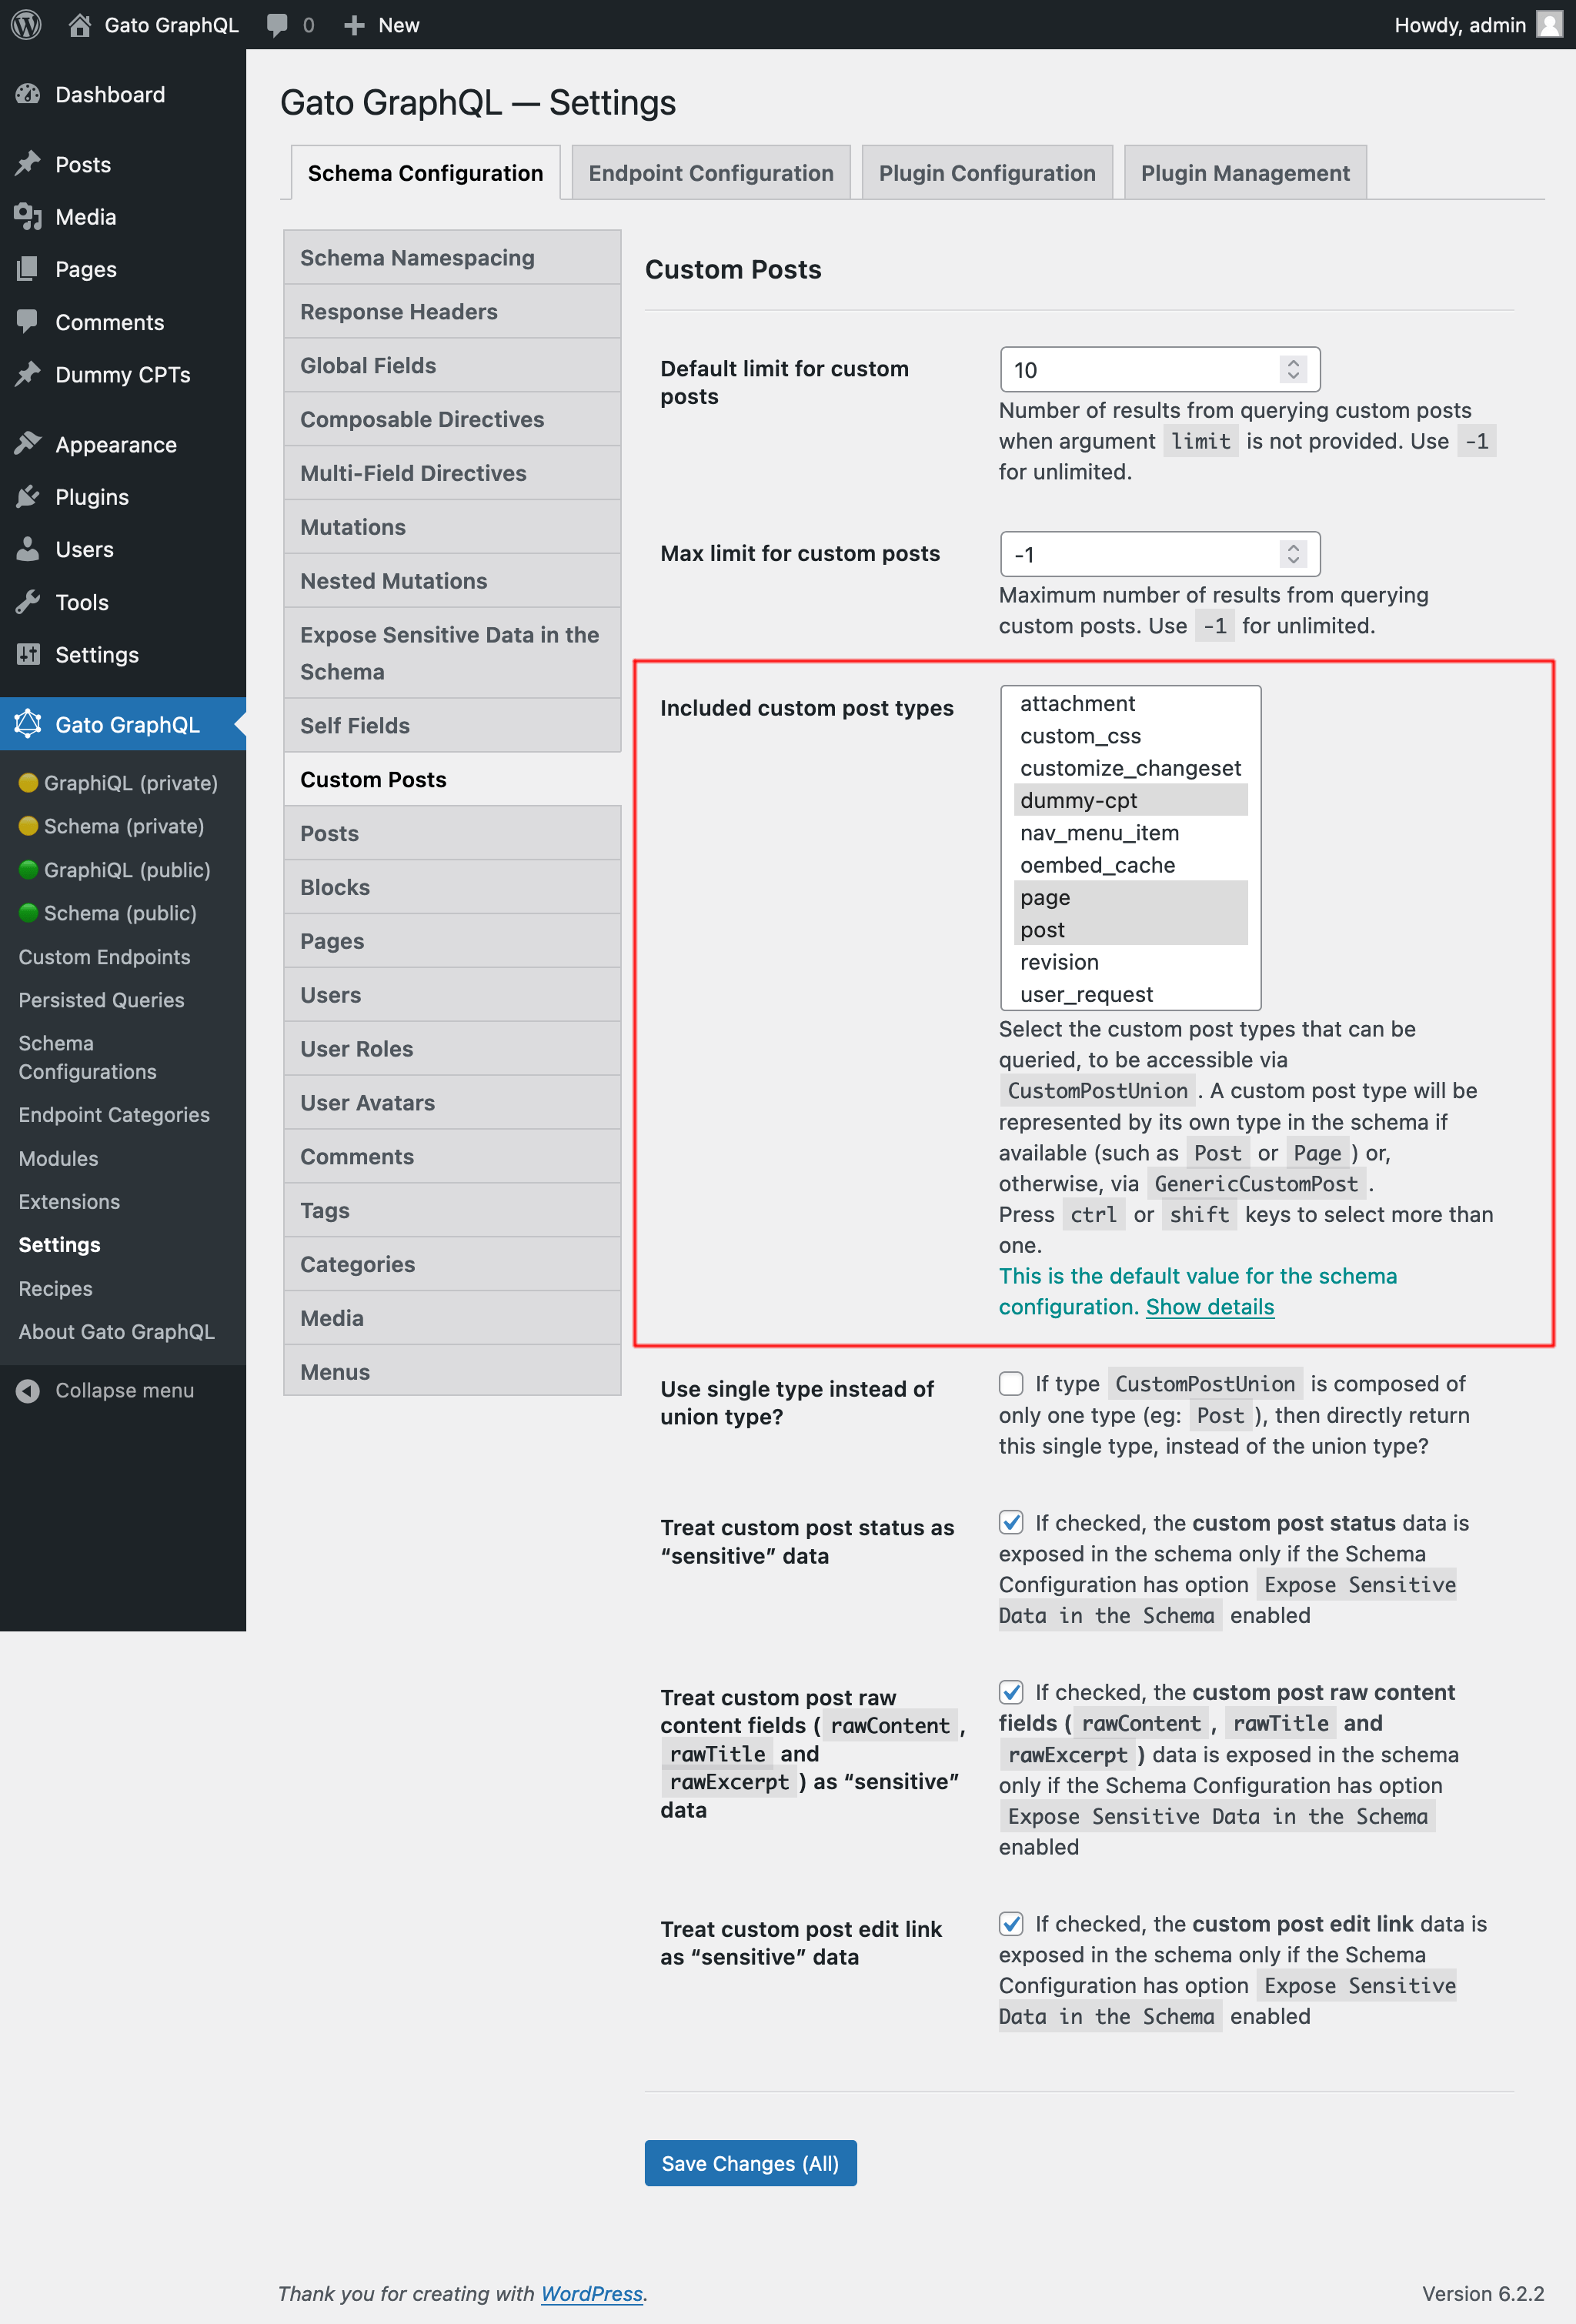 Selecting the allowed Custom Post Types in the Settings